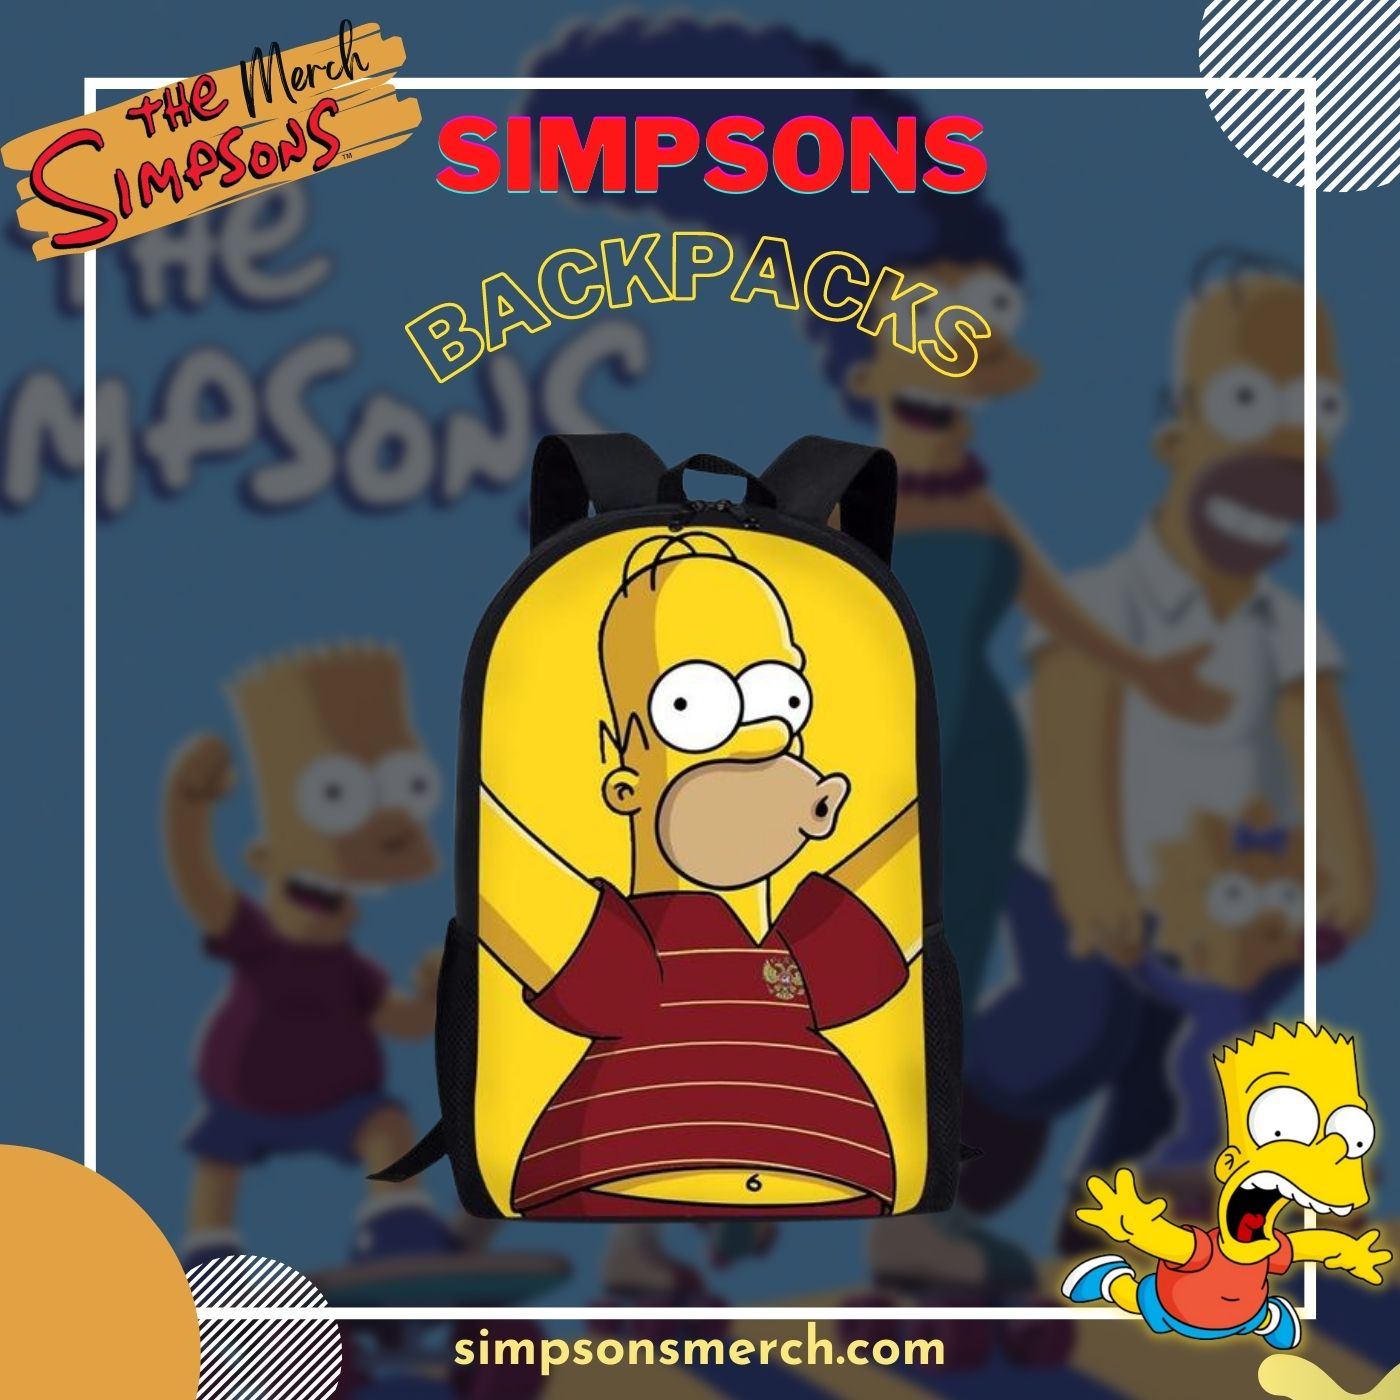 SimpSons Backpacks - The Simpsons Merch